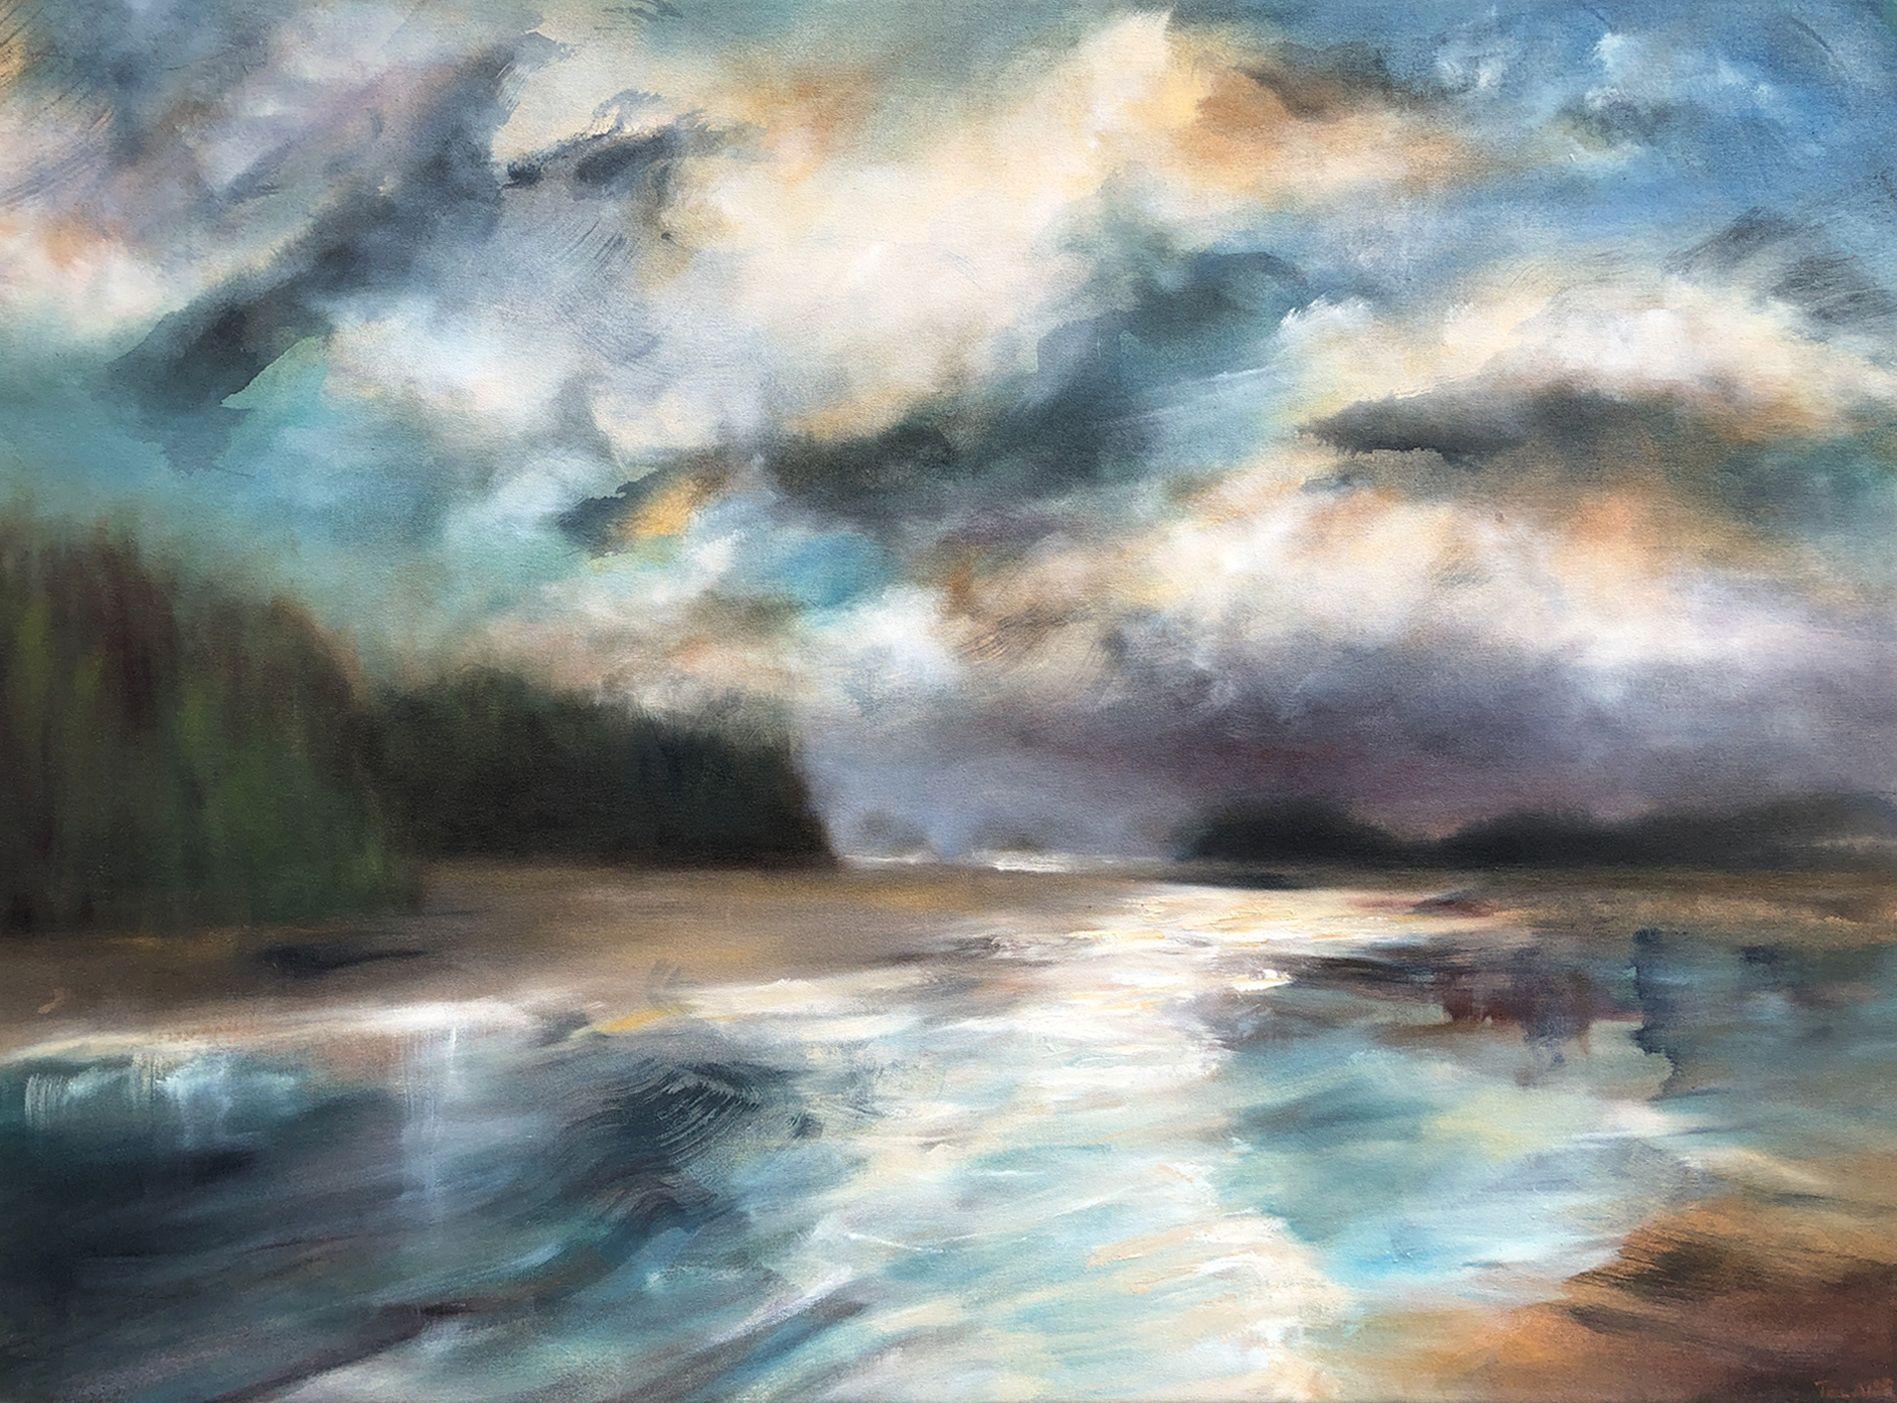 "Sunshine Gilds the Morning" is part of the â€œHalcyonâ€ collection of paintings. The scene of expansive skies and dreamy water reflections summons a sense of tranquility and an atmosphere of peace.  Inspired by the Romantics, such as W.M.Turner,